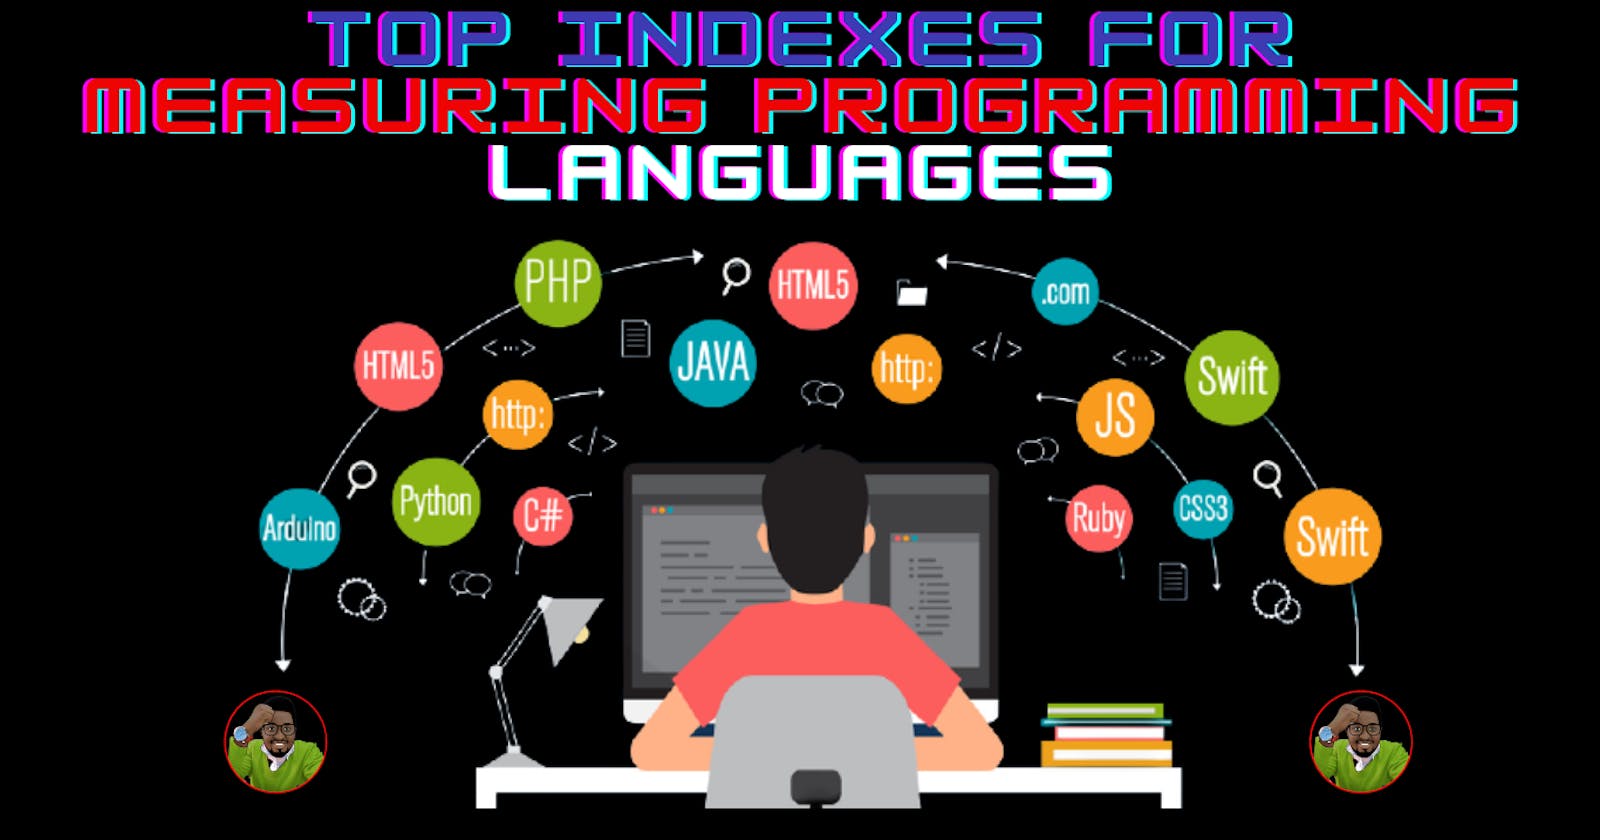 Top Indexes For Measuring Programming Languages